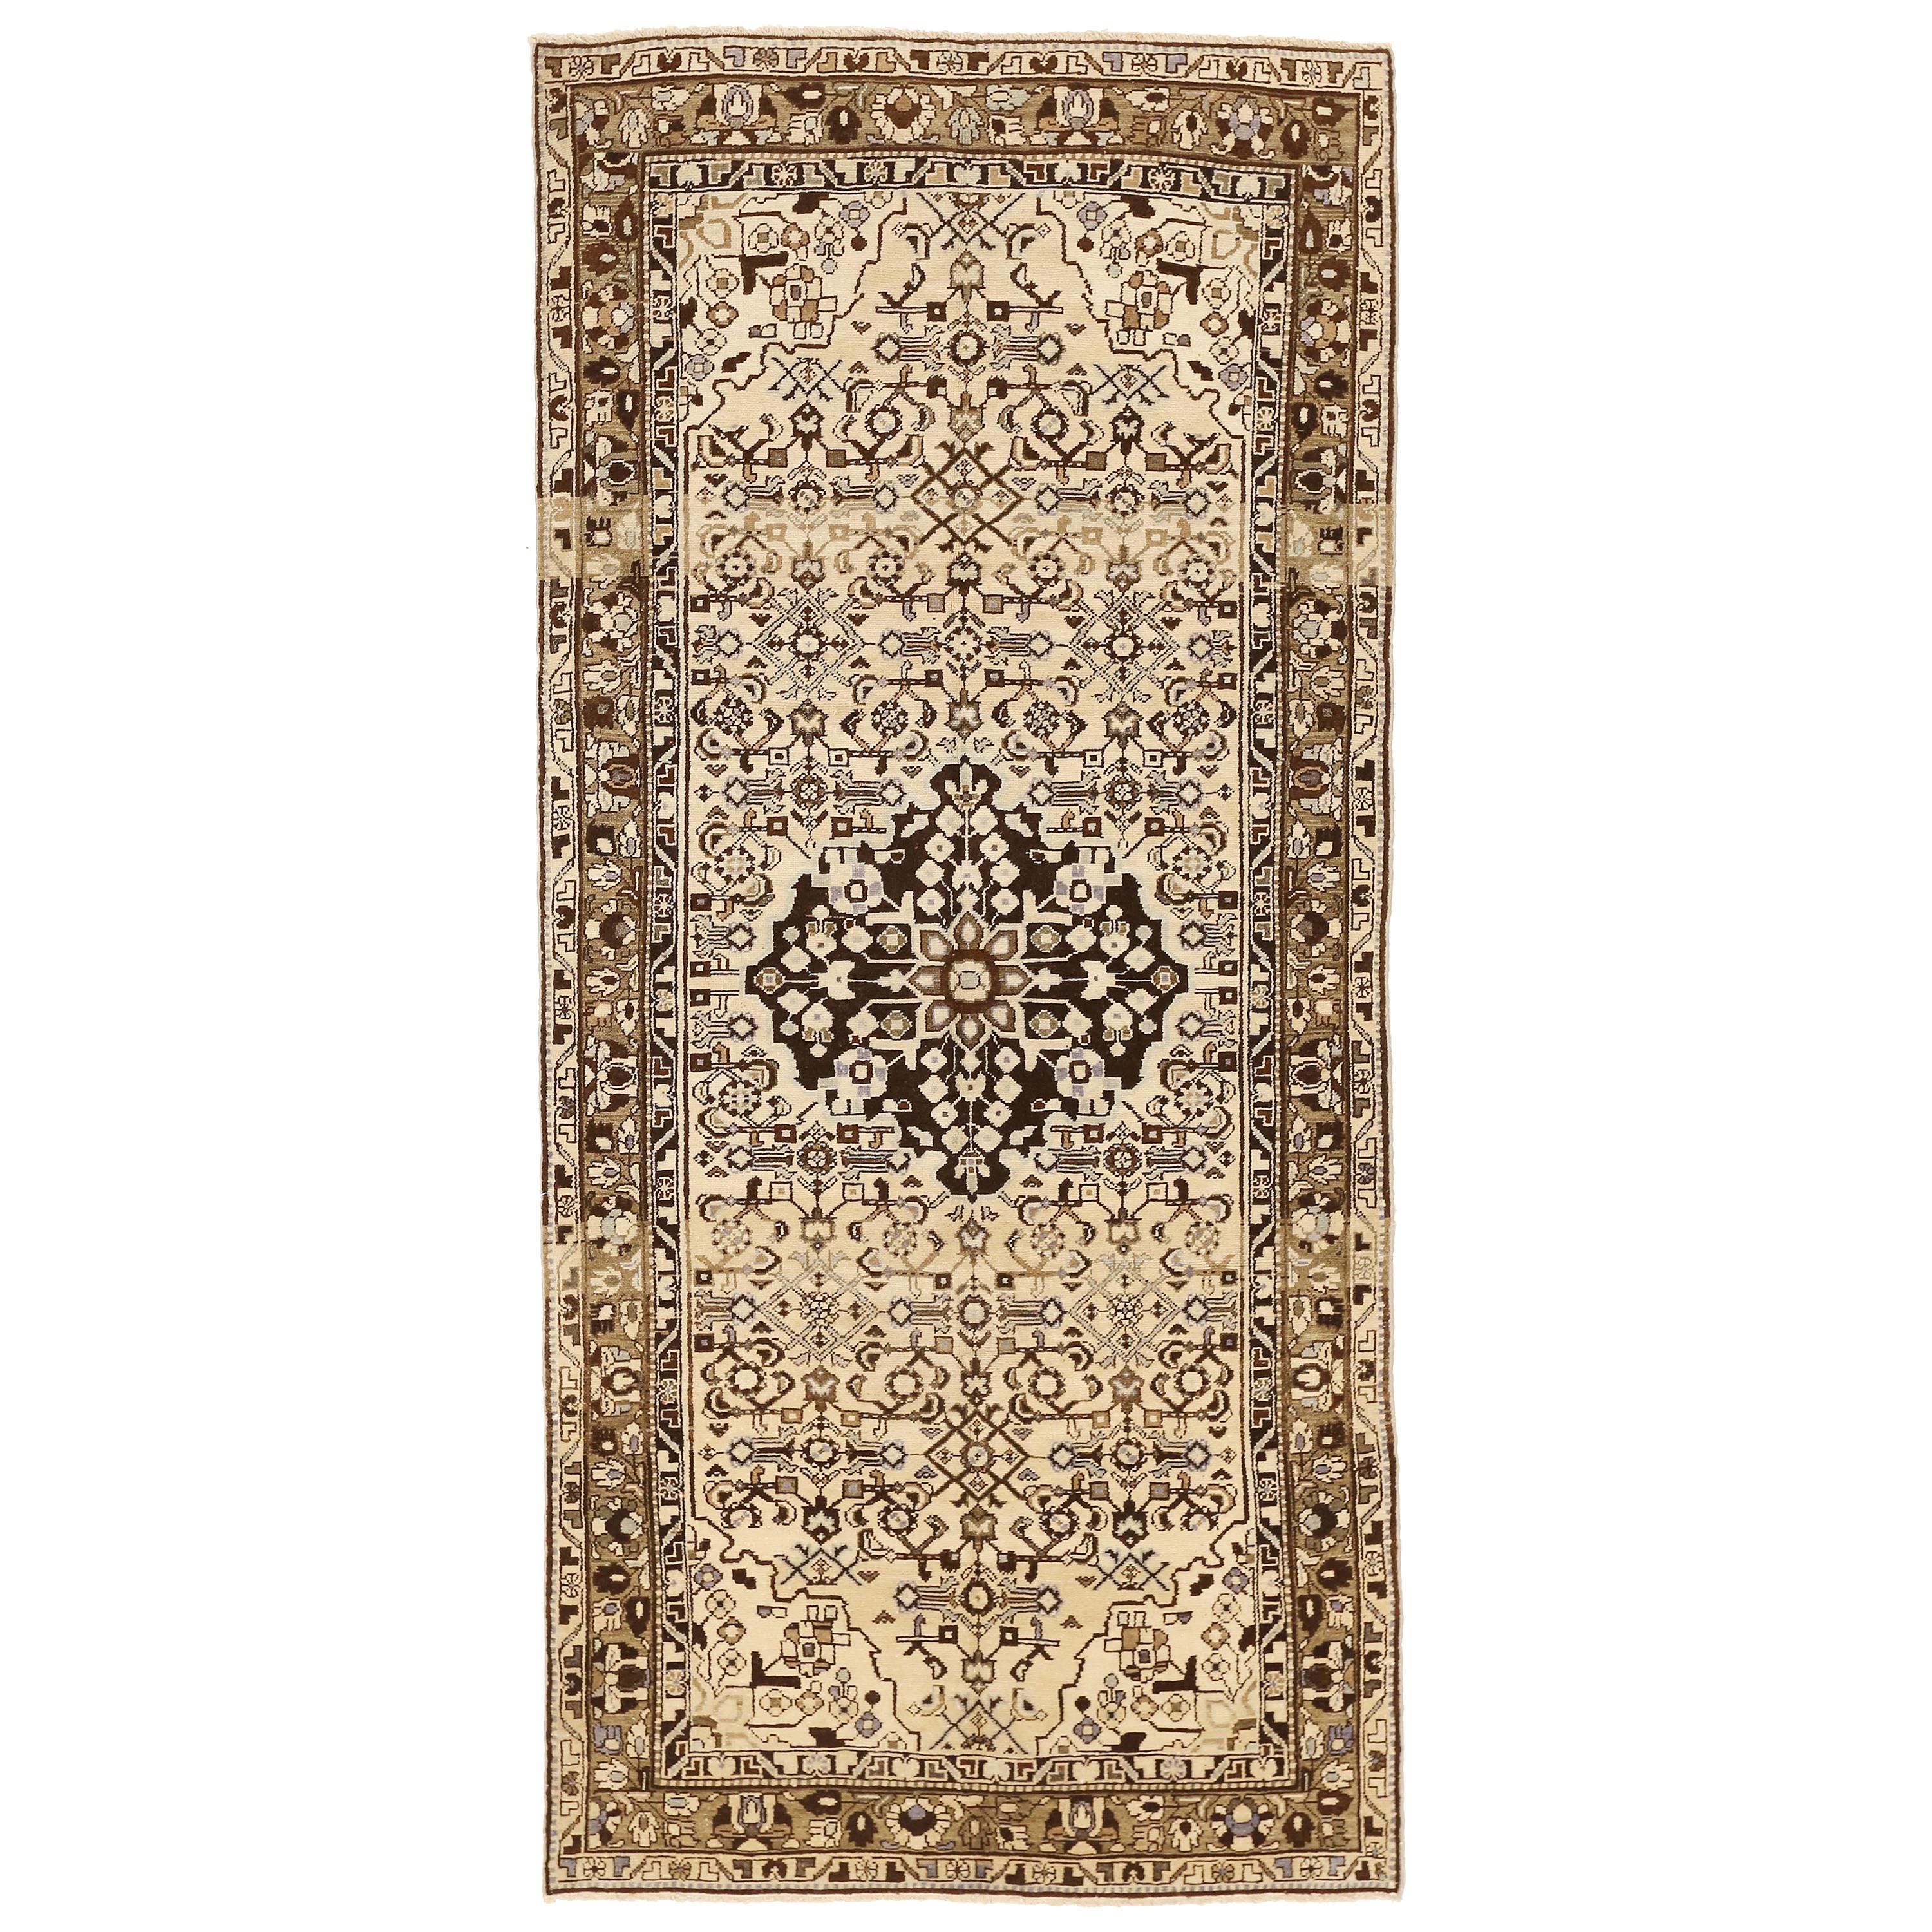 Antique Persian Malayer Rug with Black and Brown Botanical Details